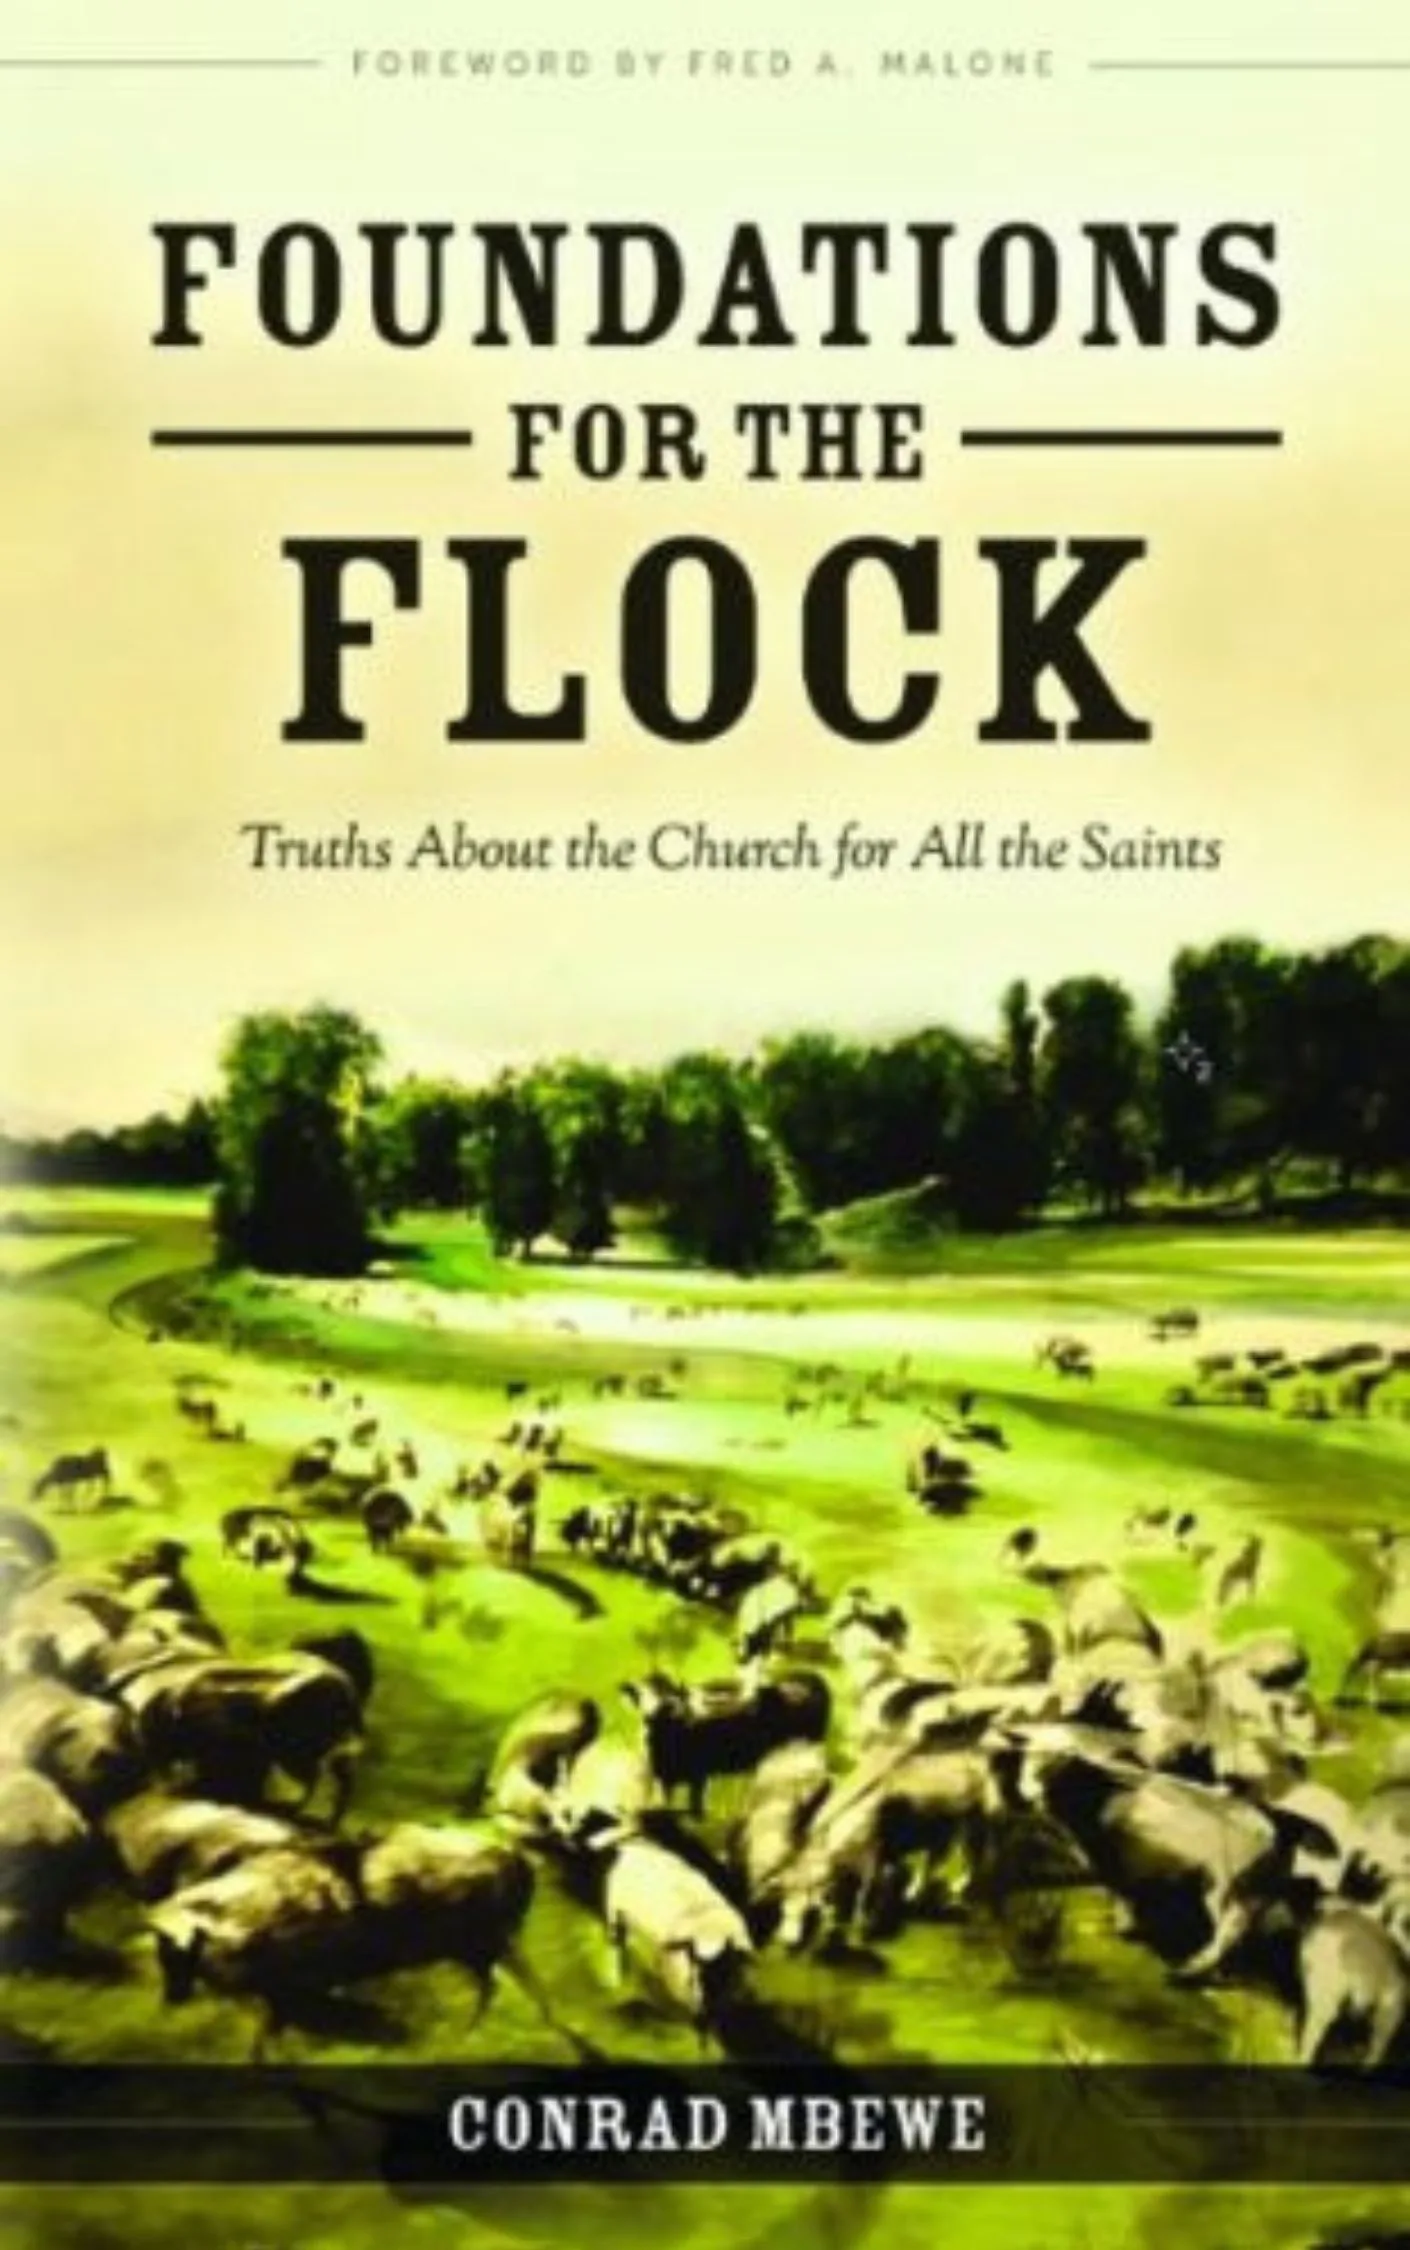 Foundations for the Flock by Conrad Mbewe